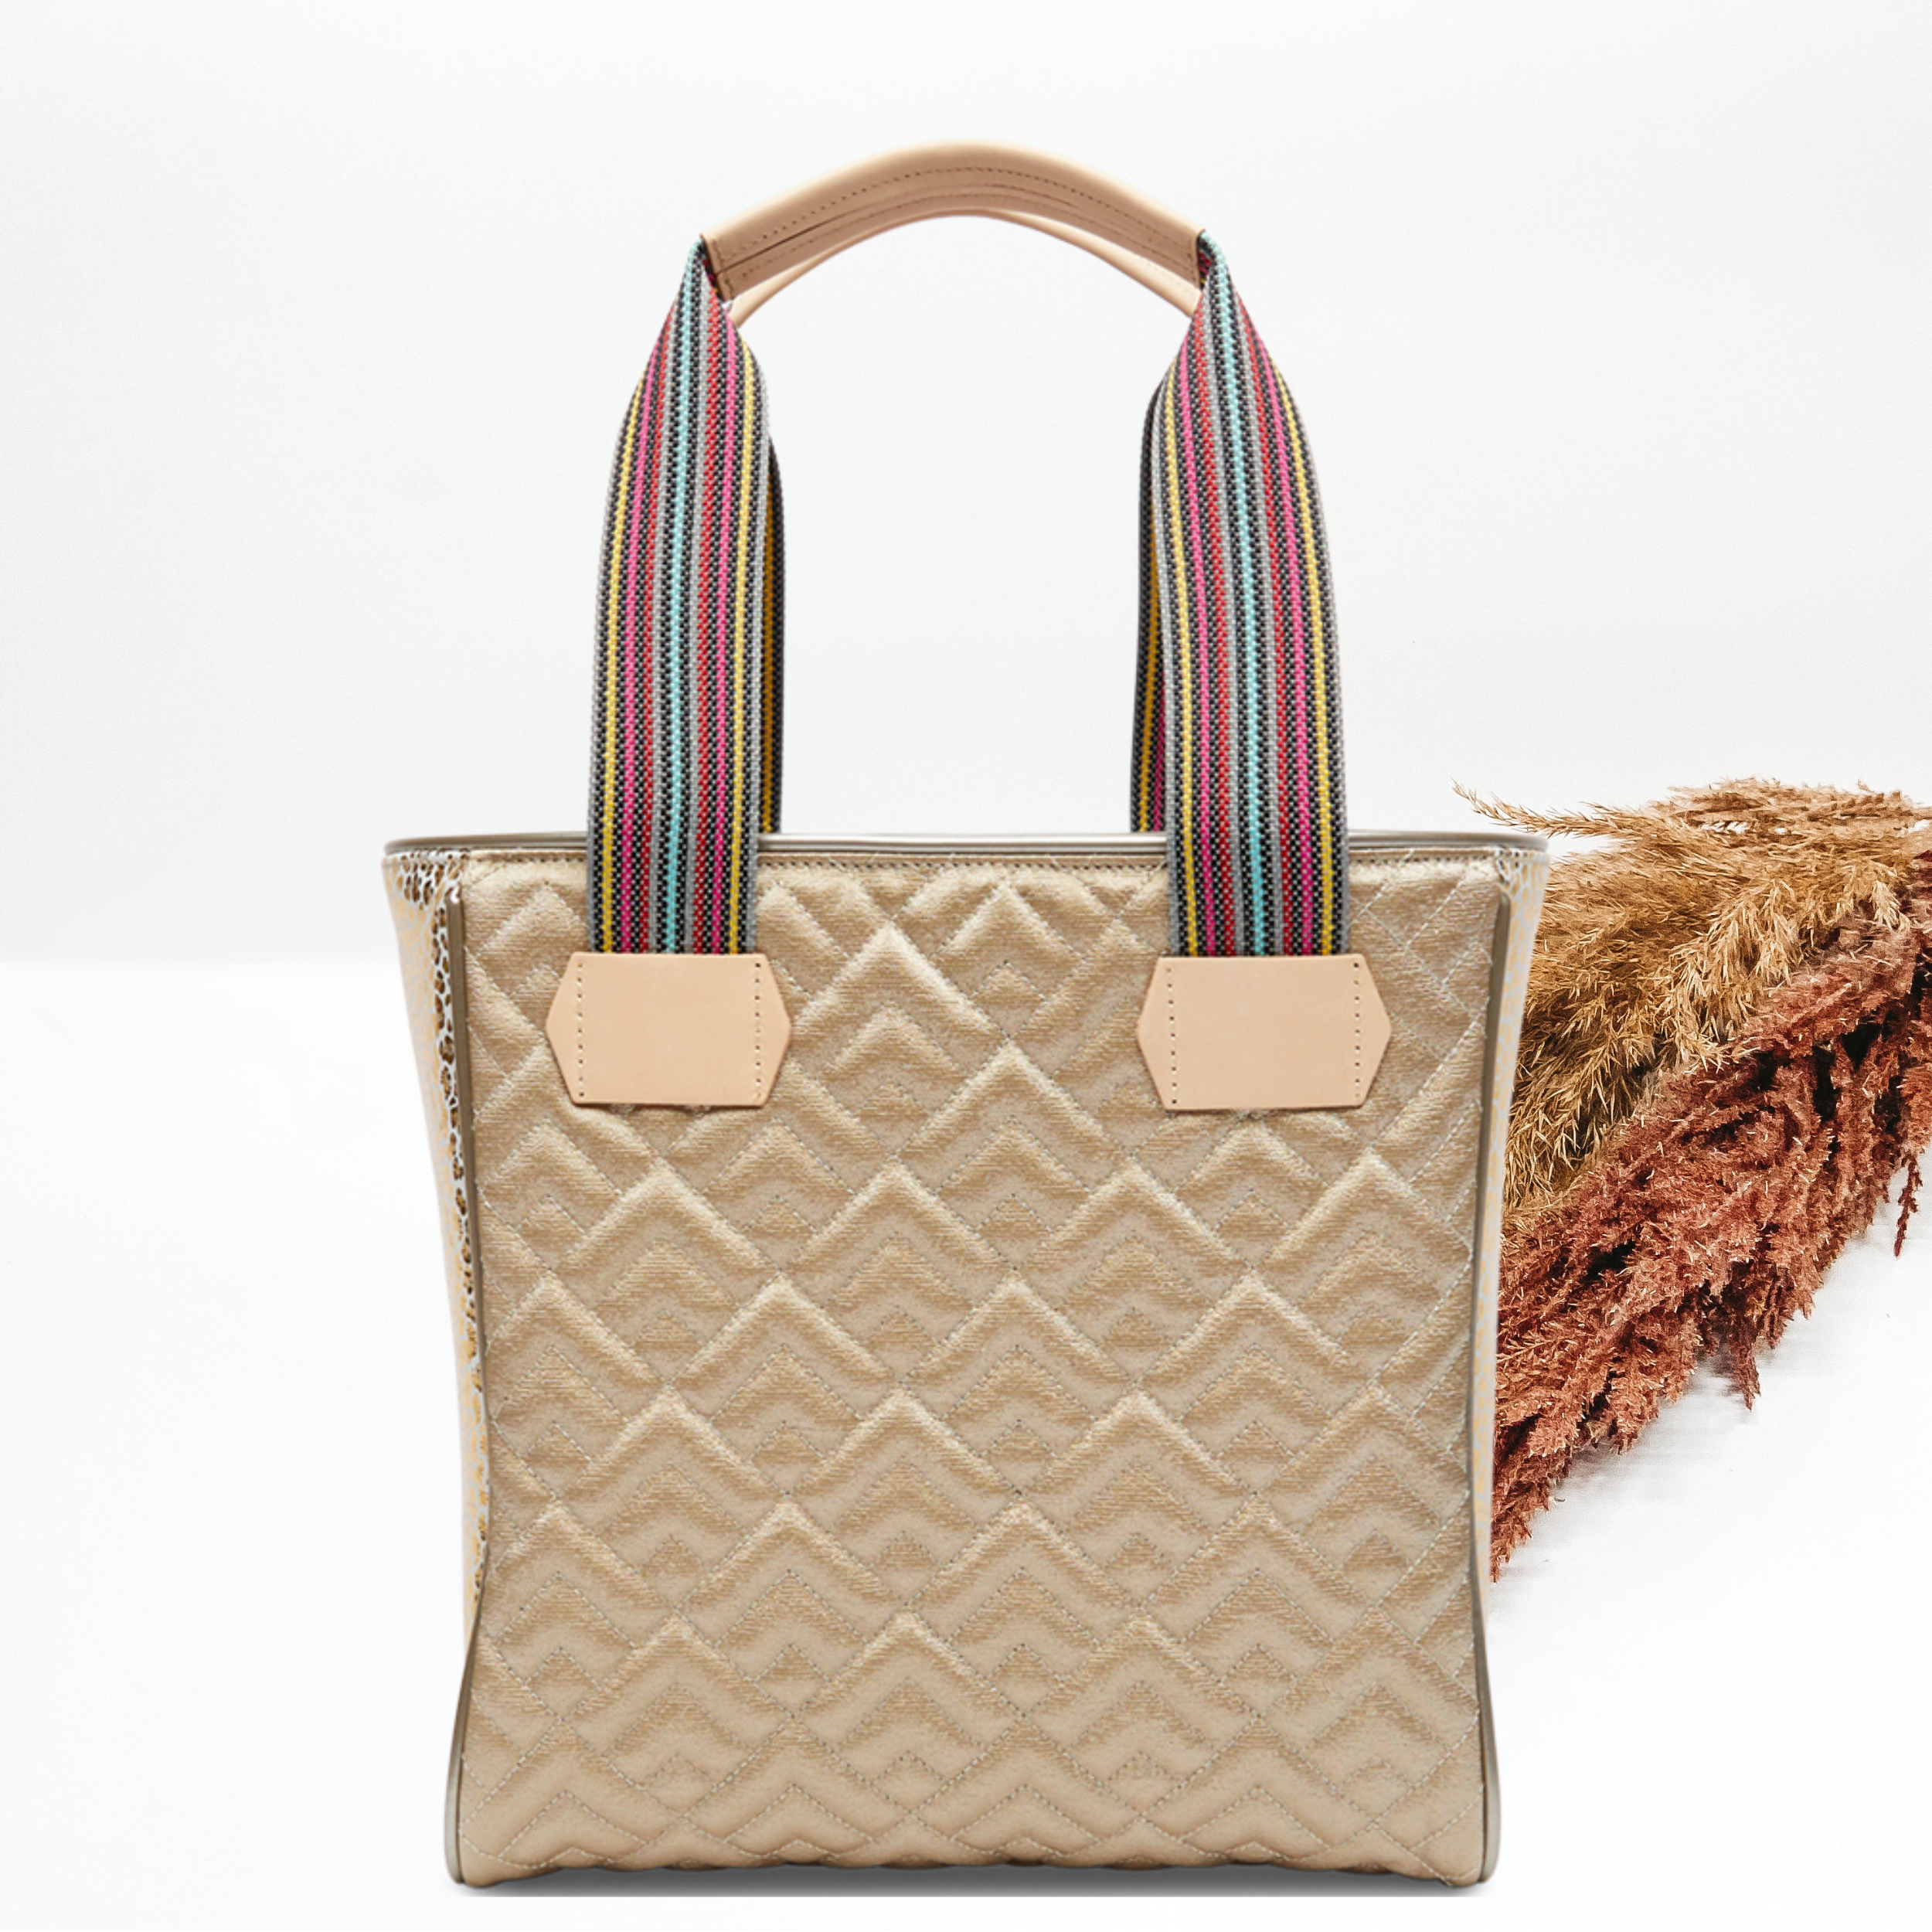 Pictured on a white background is a gold classic tote bag with woven straps and light tan handles. This bag includes a diamond stitched pattern and gold leopard side panels. 